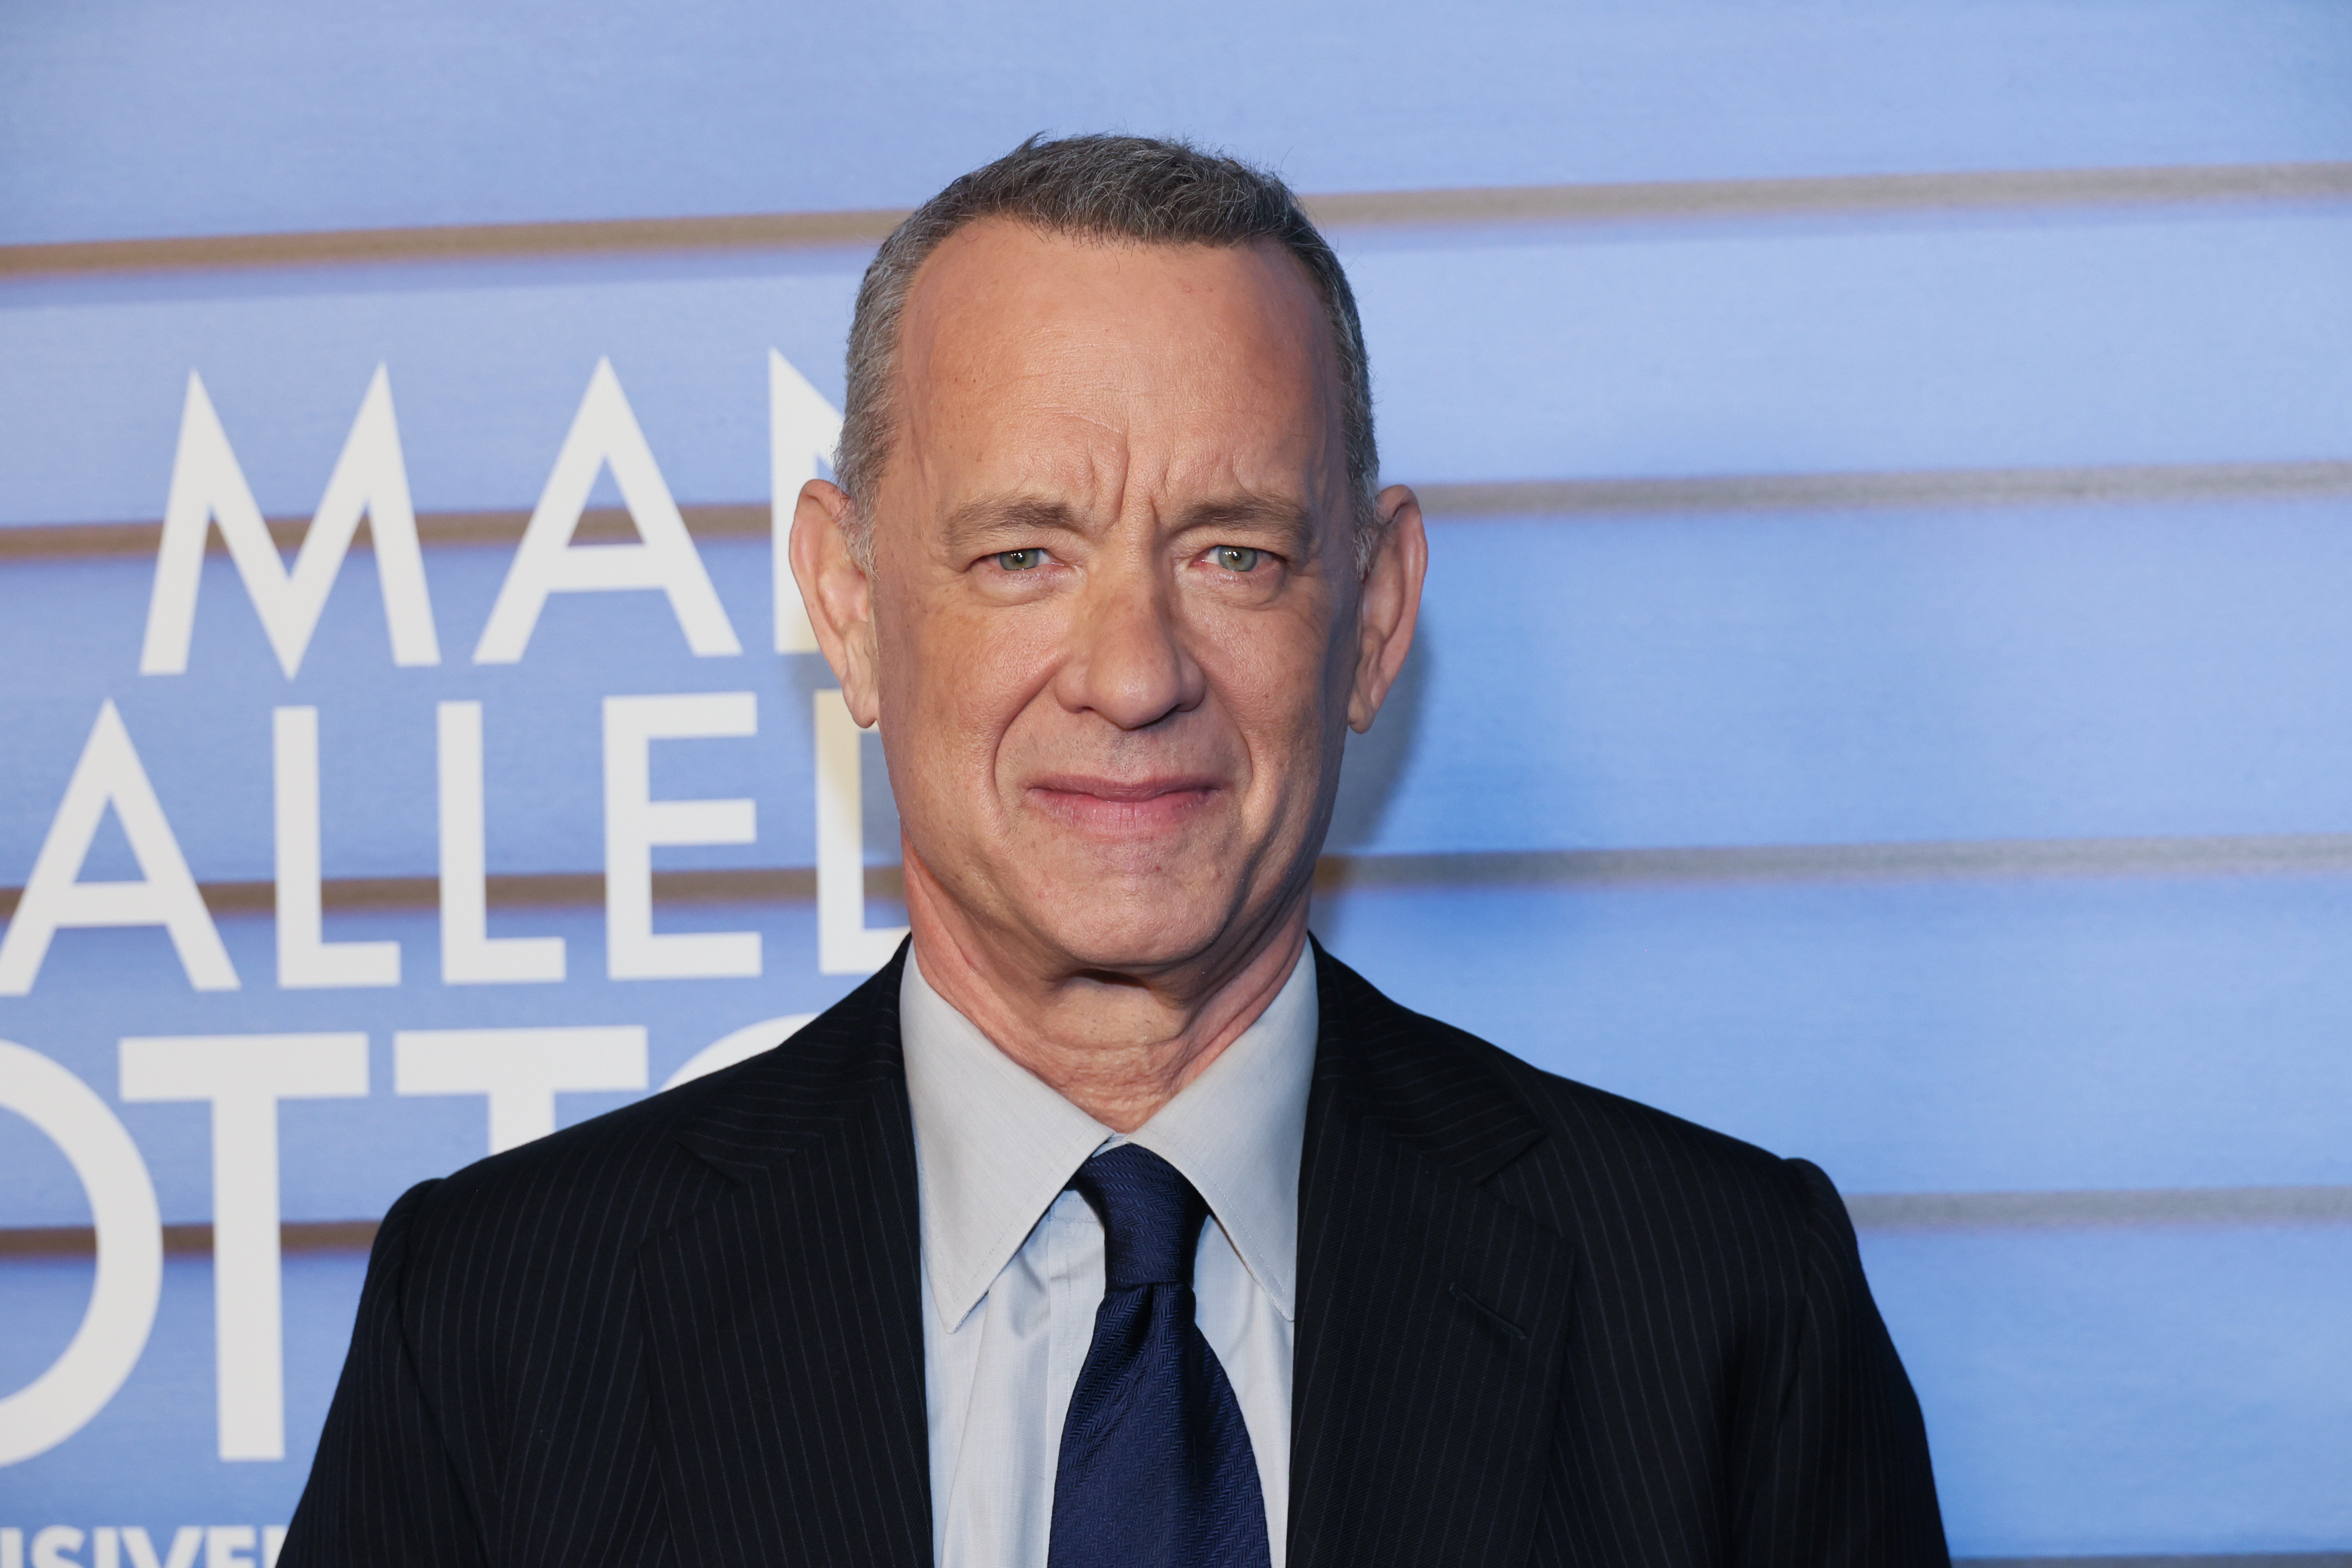 ‘I’ve had tough days trying to be a professional when my life has been falling apart in more ways than one,’ Hanks has said